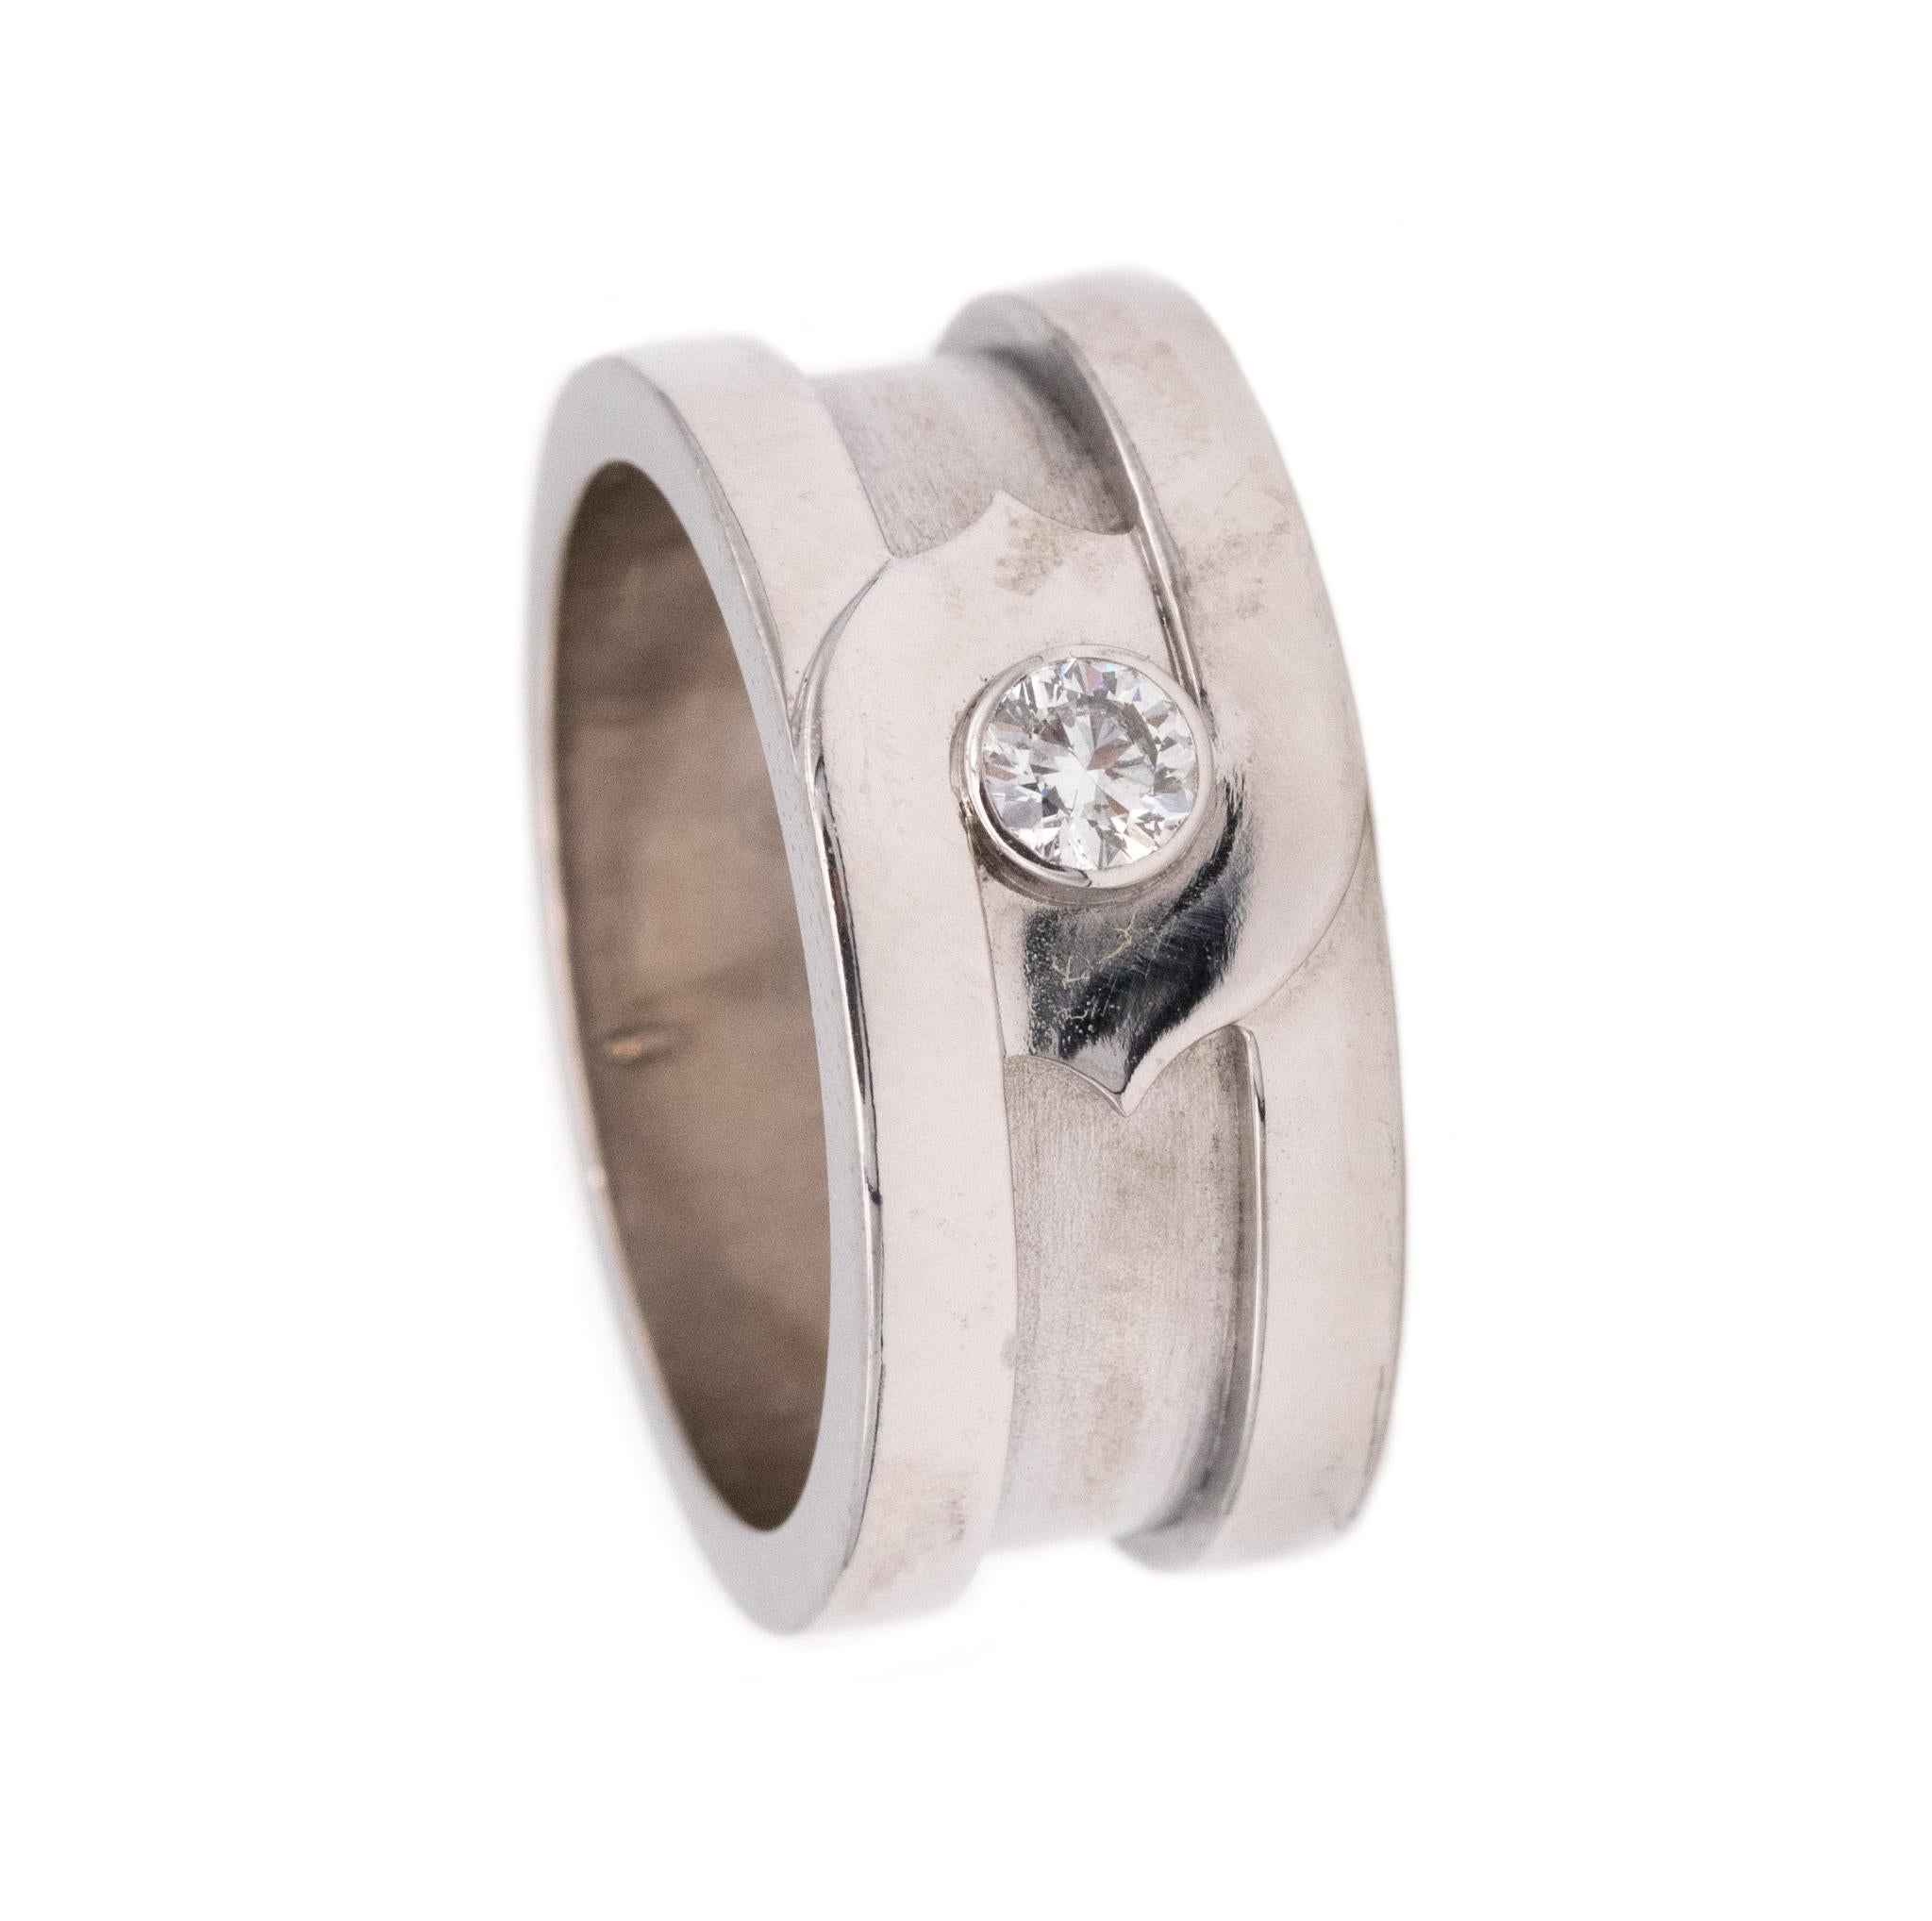 Cartier Paris C 2 Ring in 18Kt White Gold with One VVS Round Diamond For Sale 2